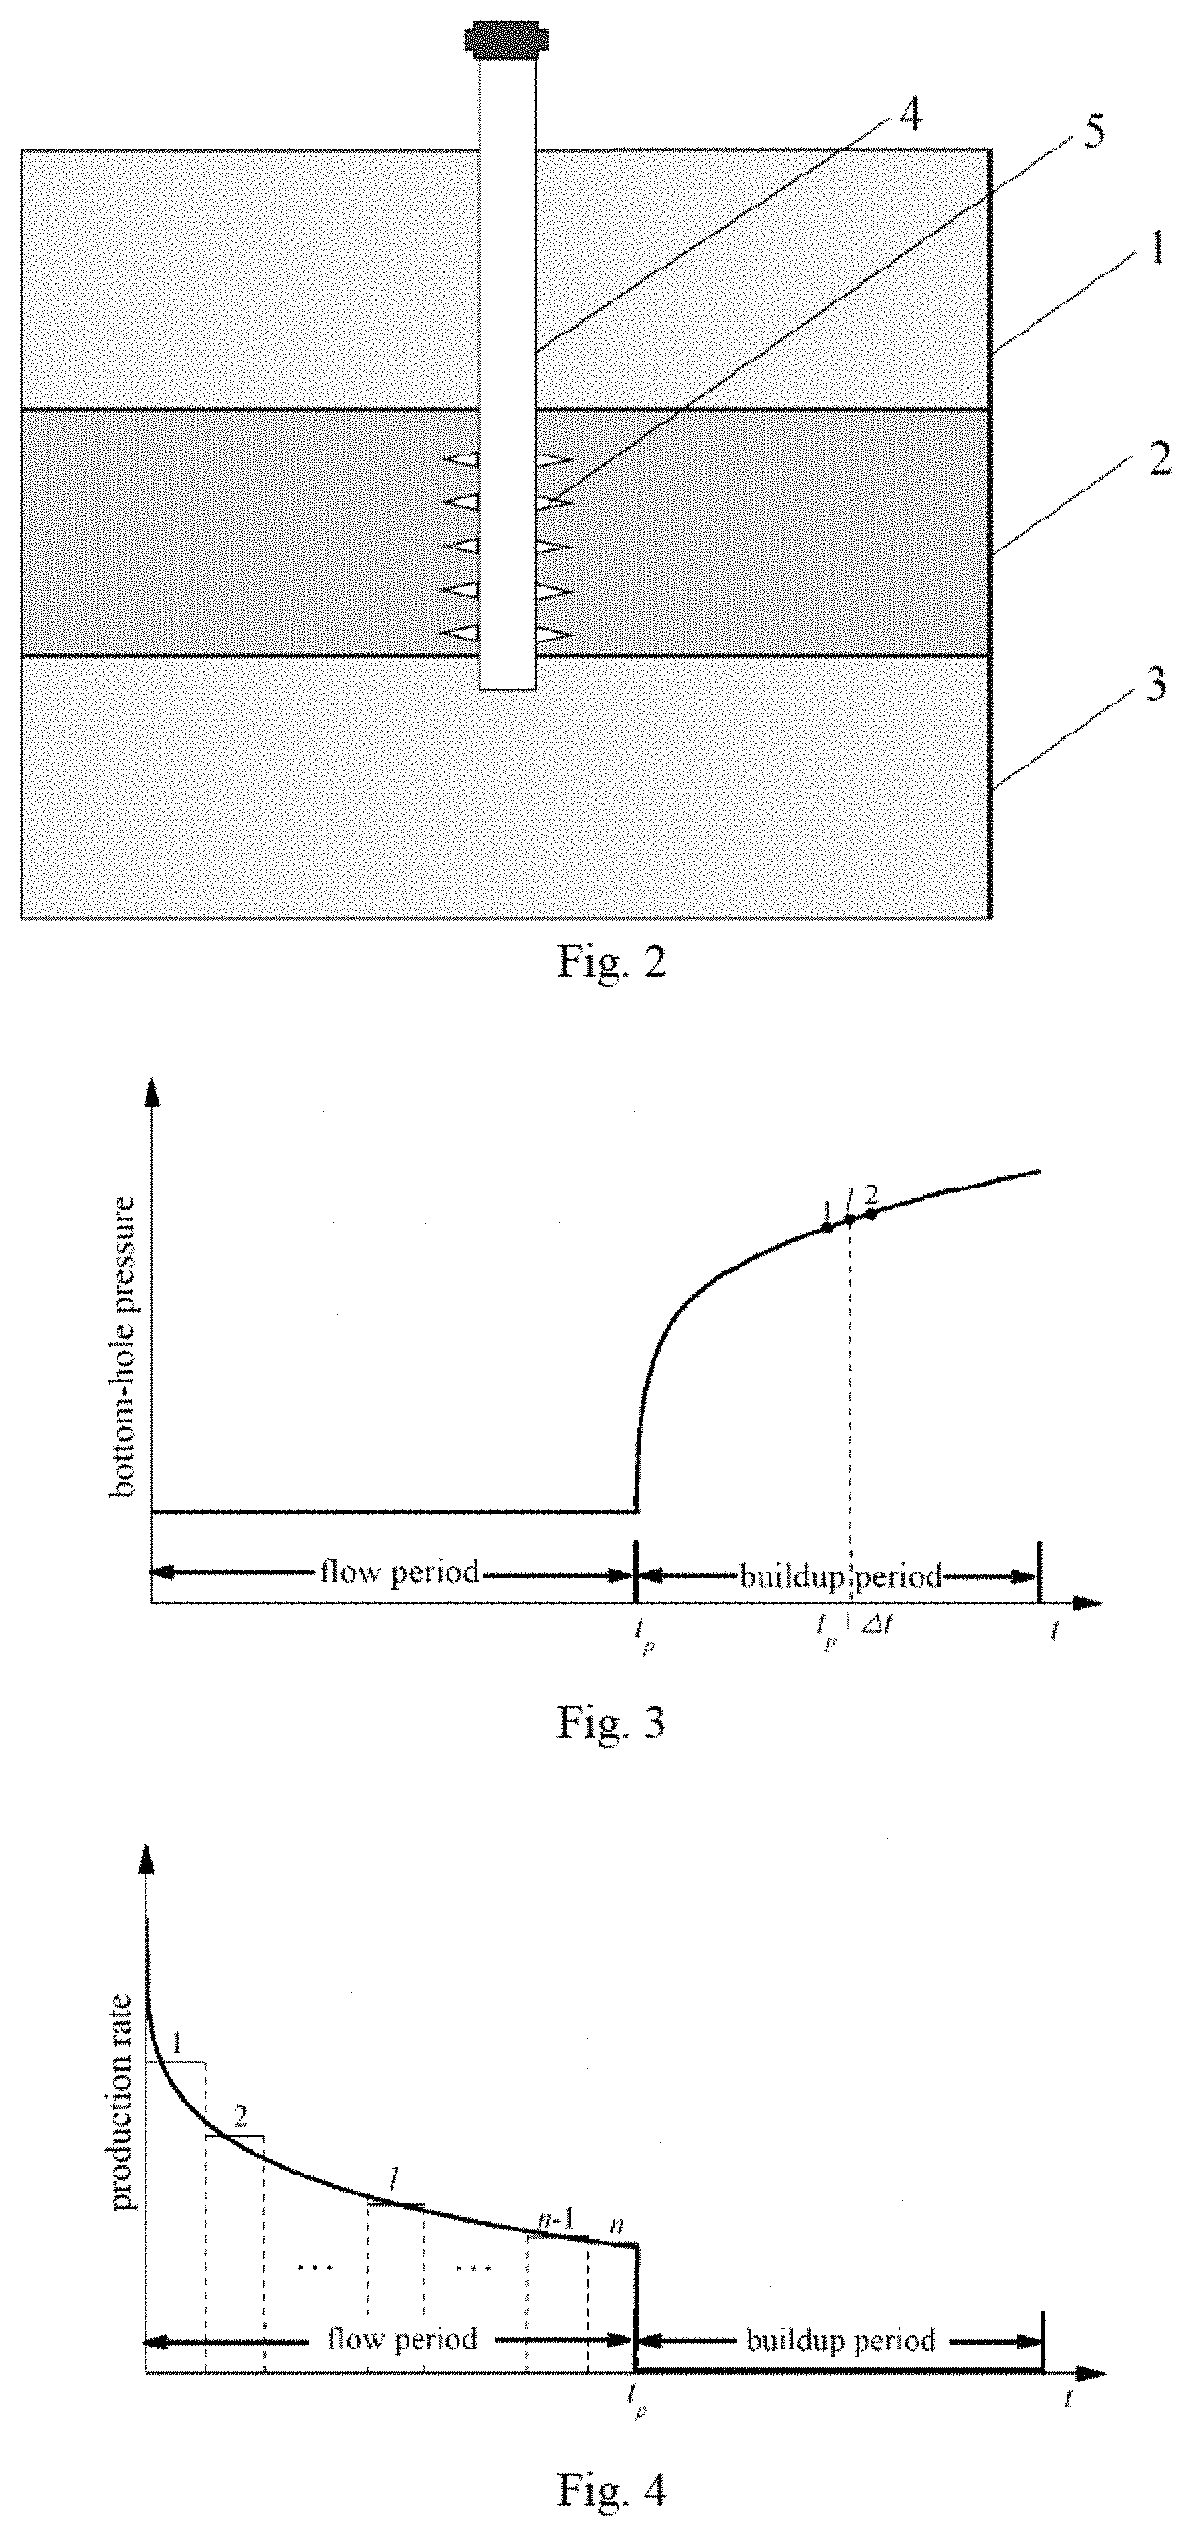 Method for obtaining formation parameters of gas hydrate reservoir through well testing interpretation